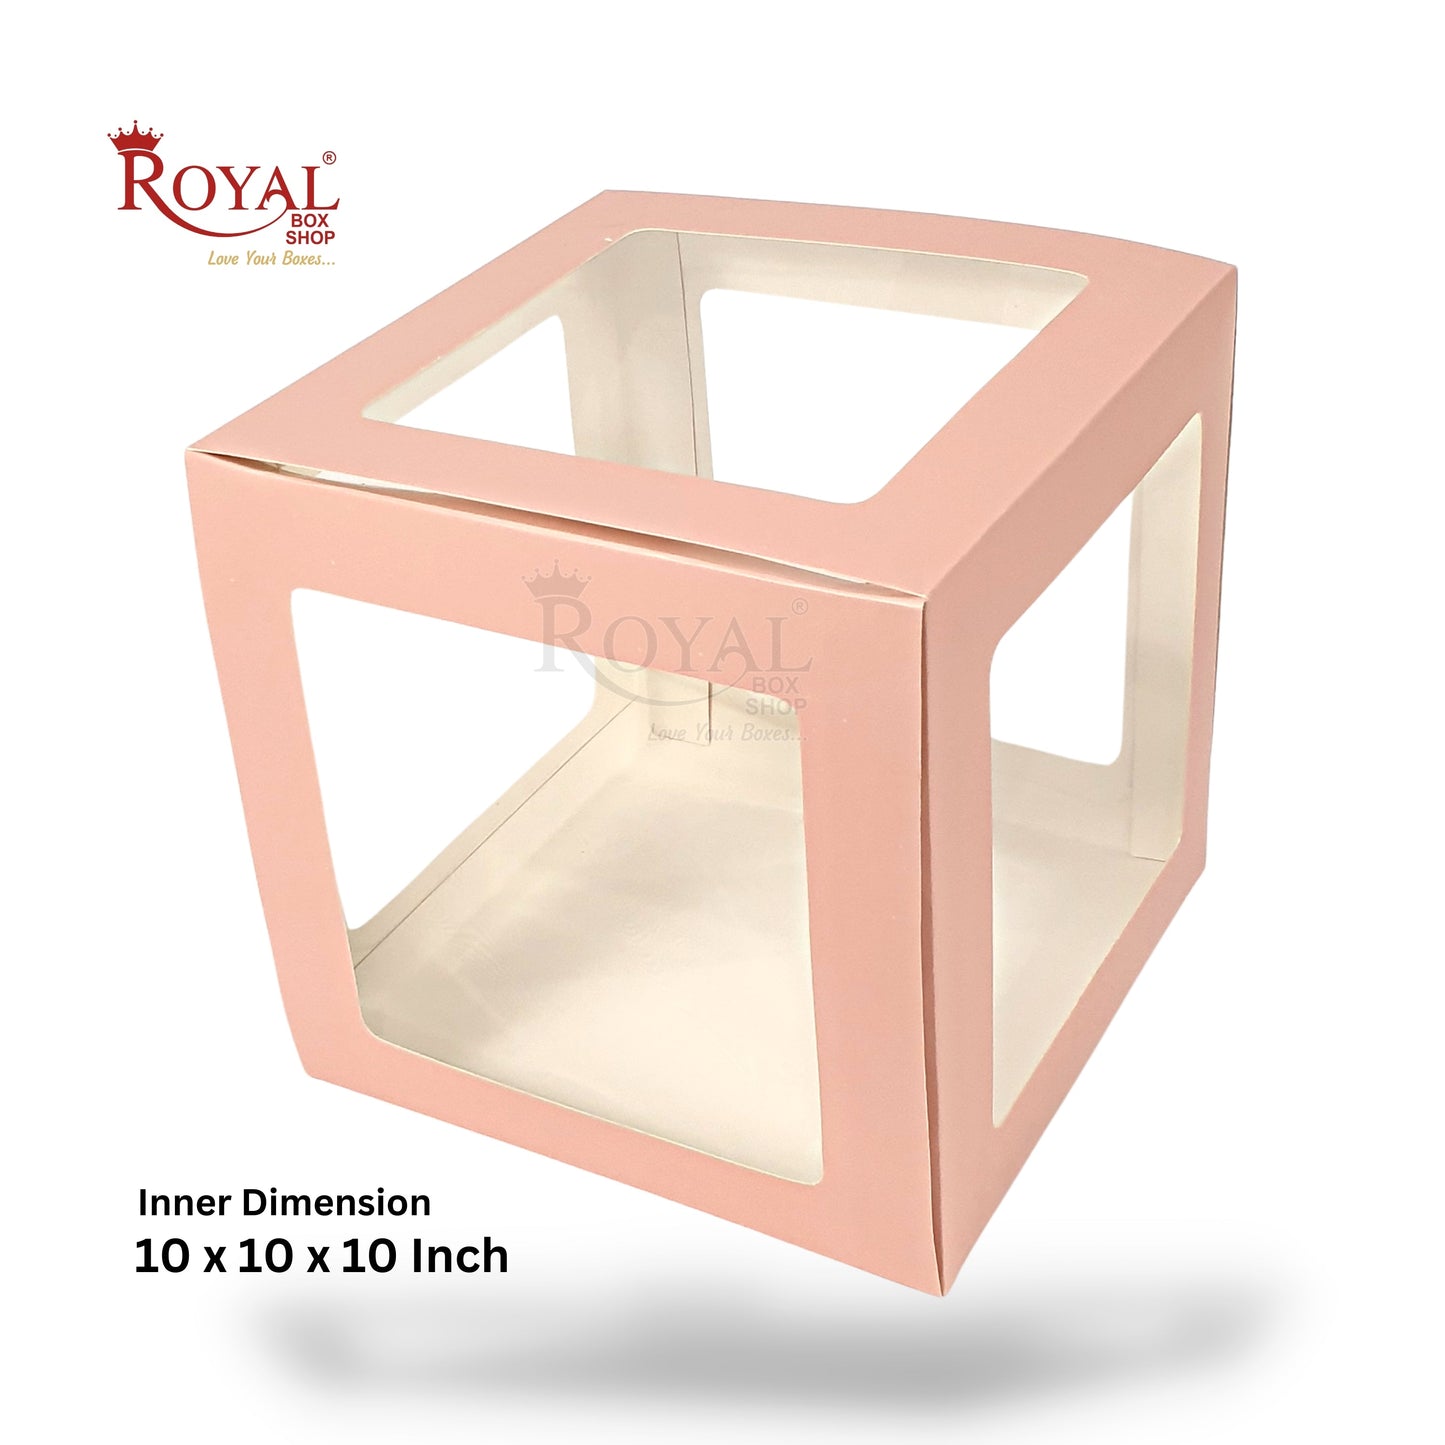 RoyalBoxShop® 5-Window Gift Box I 10x10x10 Inch I Pink I Perfect for Bakery Cakes, Gifts, Parties, Any Occasion Royal Box Shop